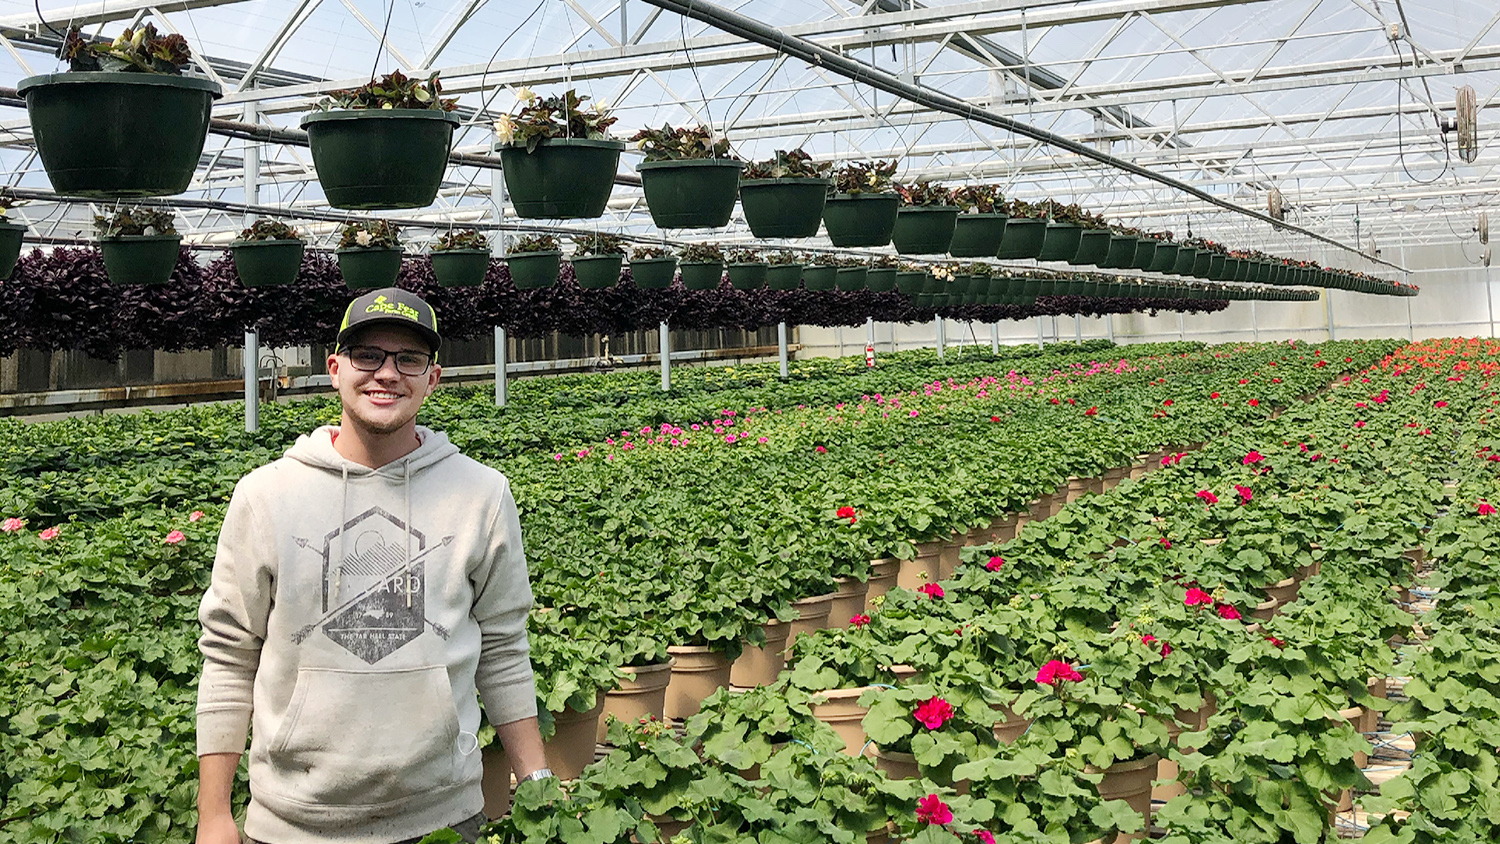 Malachi Curtis stands in the Cyn-Mar Inc greenhouses where he interned as the assistant grower.